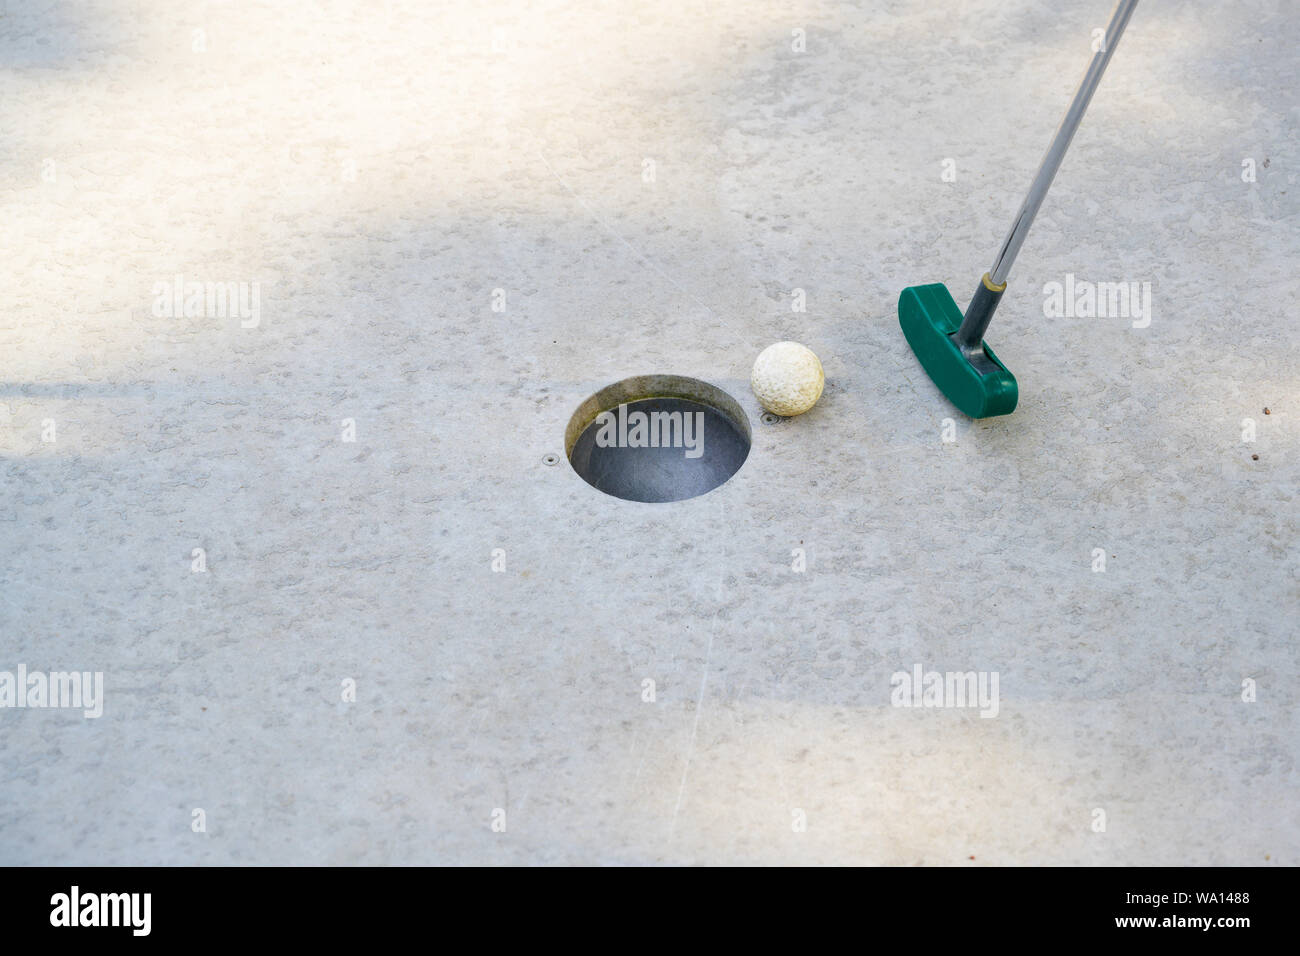 mini golf club hits the ball into the hole on a track from concrete, copy space, selected focus Stock Photo